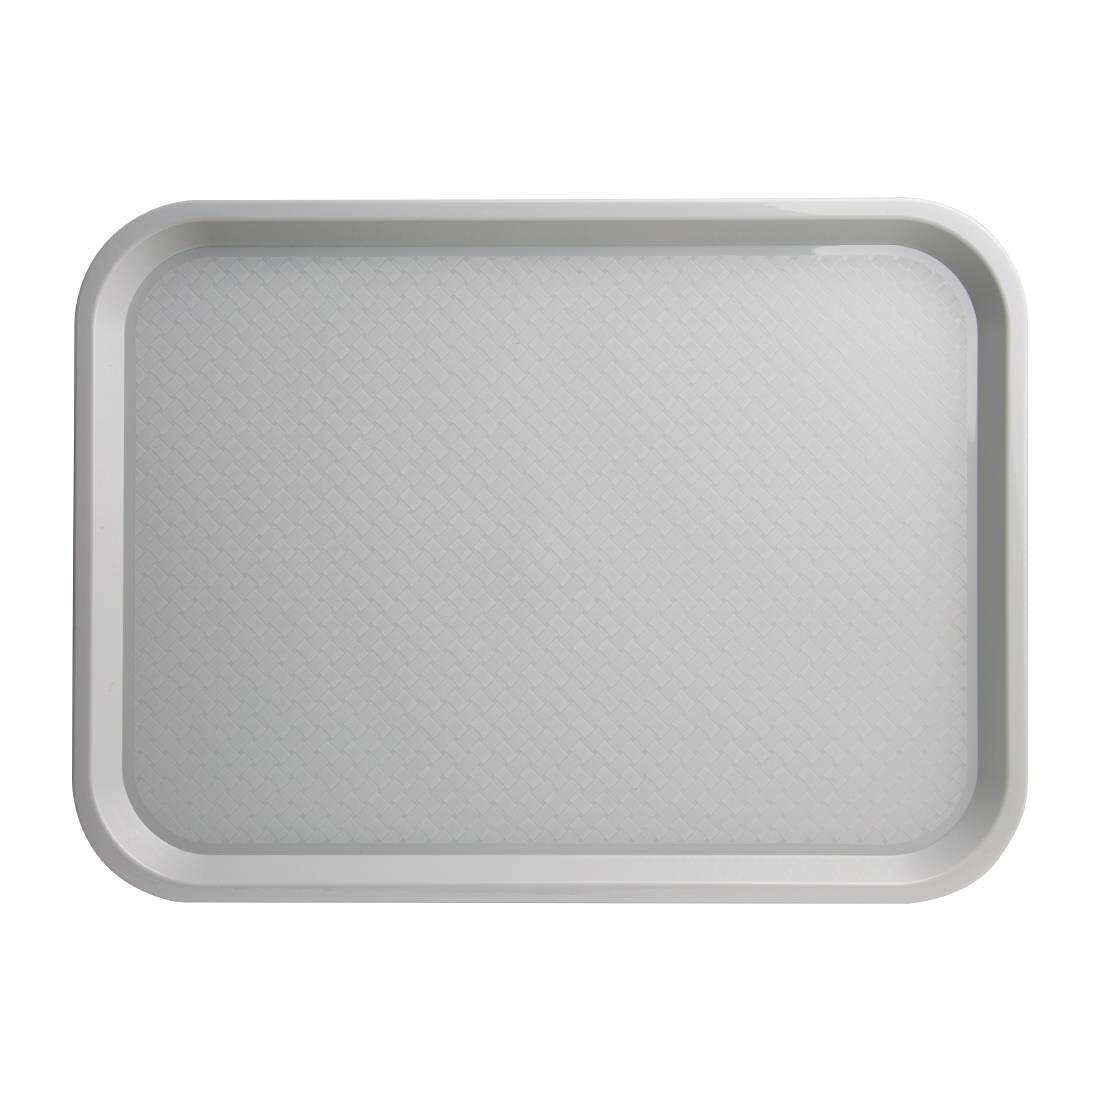 Carlisle FoodService Products CT121623 Café Standard Cafeteria / Fast Food Tray, 12